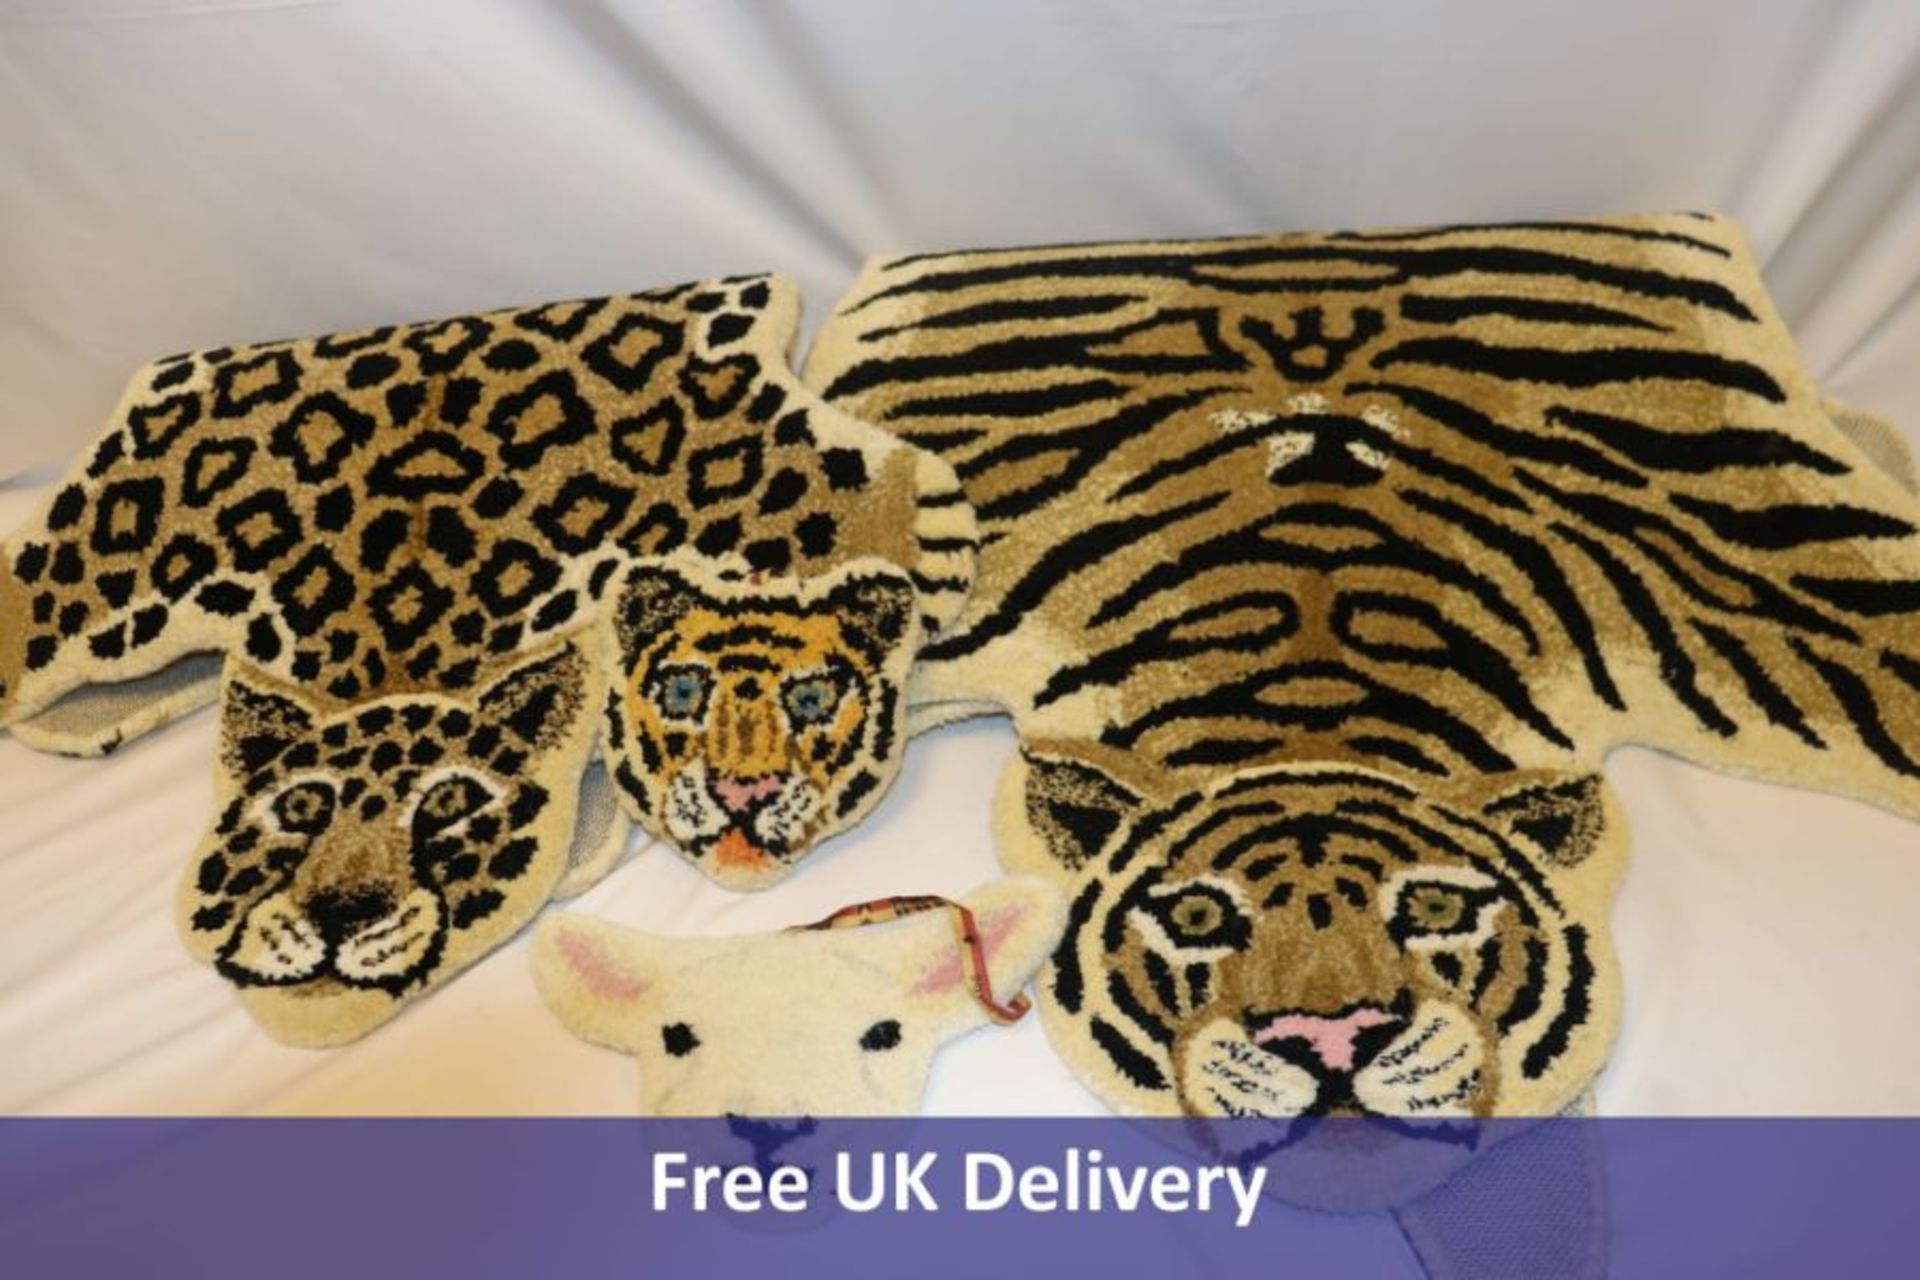 Four Doing Goods items to include 1x Large Tiger Rug, 1x Small leopard, 1x Sheep Head, Small, 1x Tig